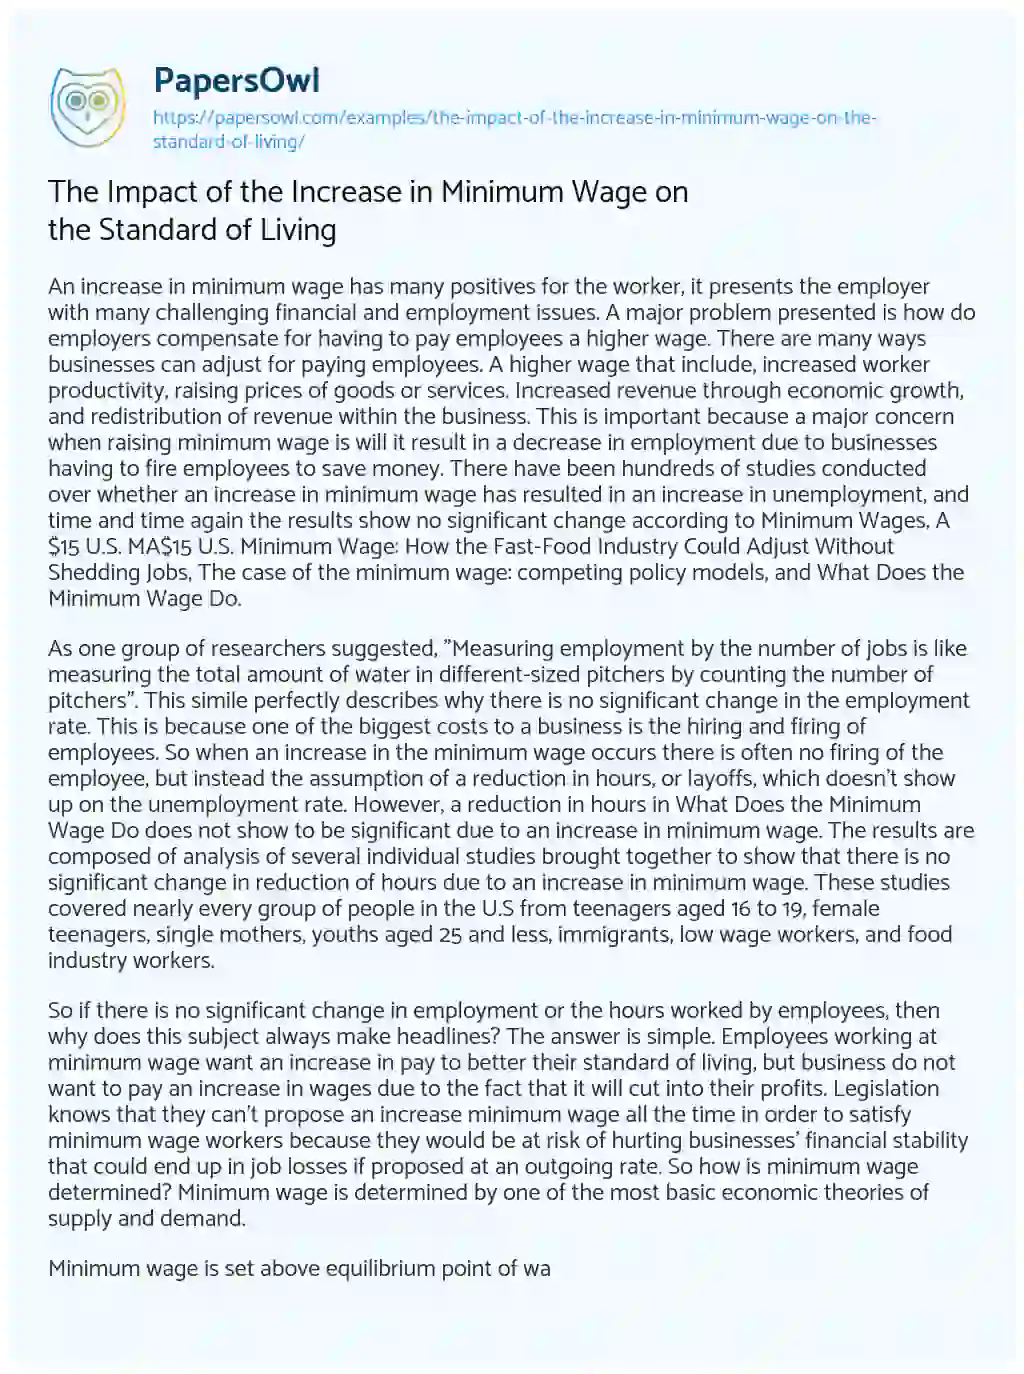 Essay on The Impact of the Increase in Minimum Wage on the Standard of Living